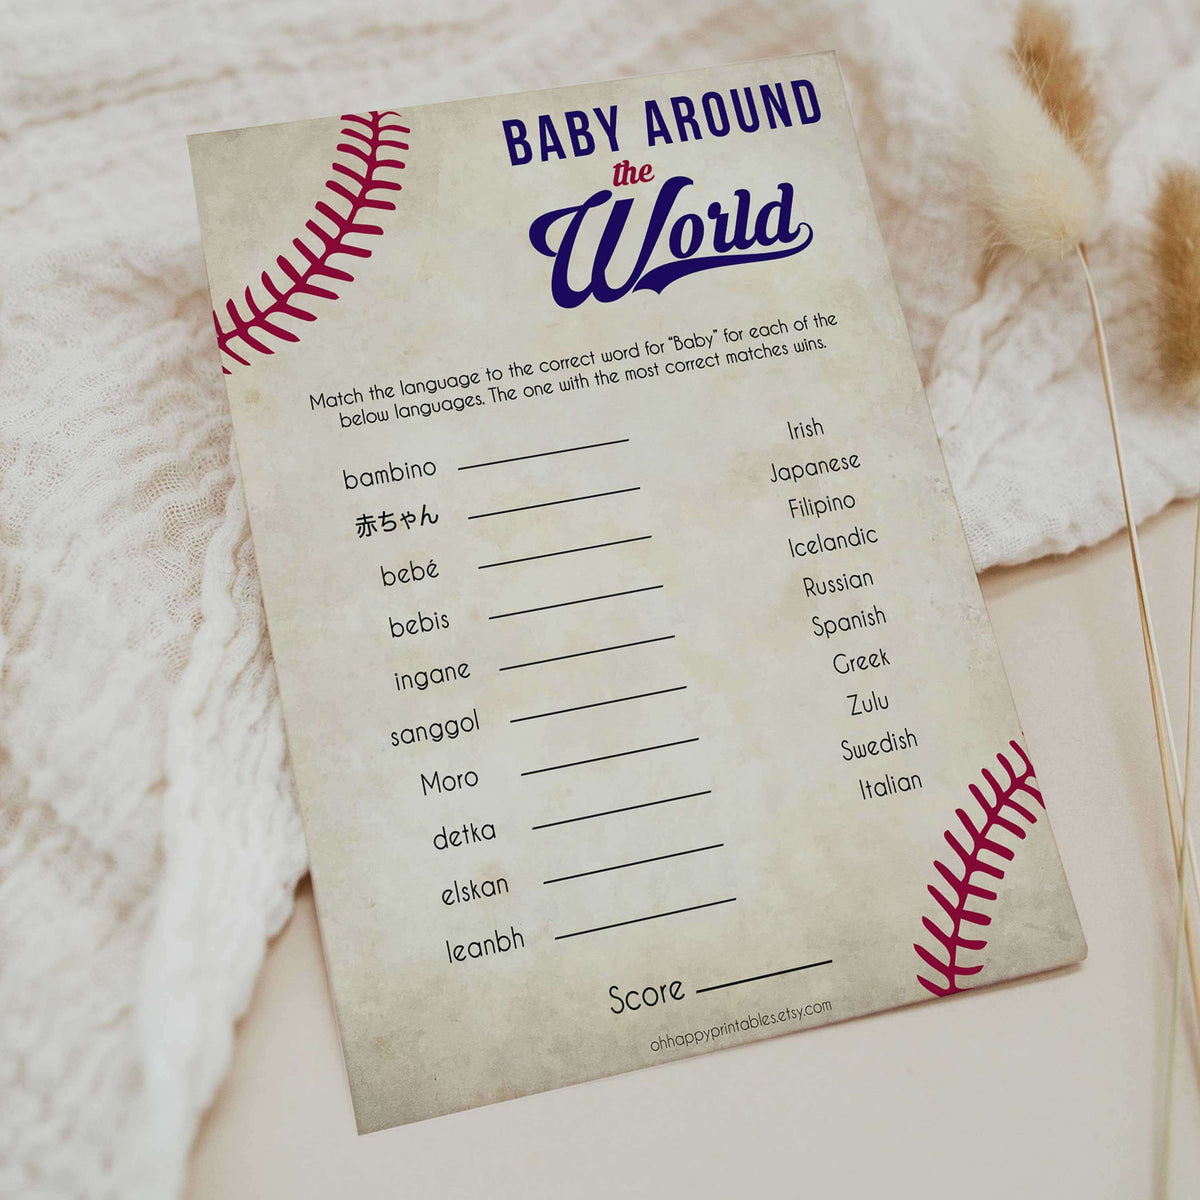 Baby Around The World Game, Baby in Different Languages, Baseball Baby Shower, Baby Shower Games, Travel Baby Game, Baby Shower Game, printable baby shower games, fun baby shower games, popular baby shower games